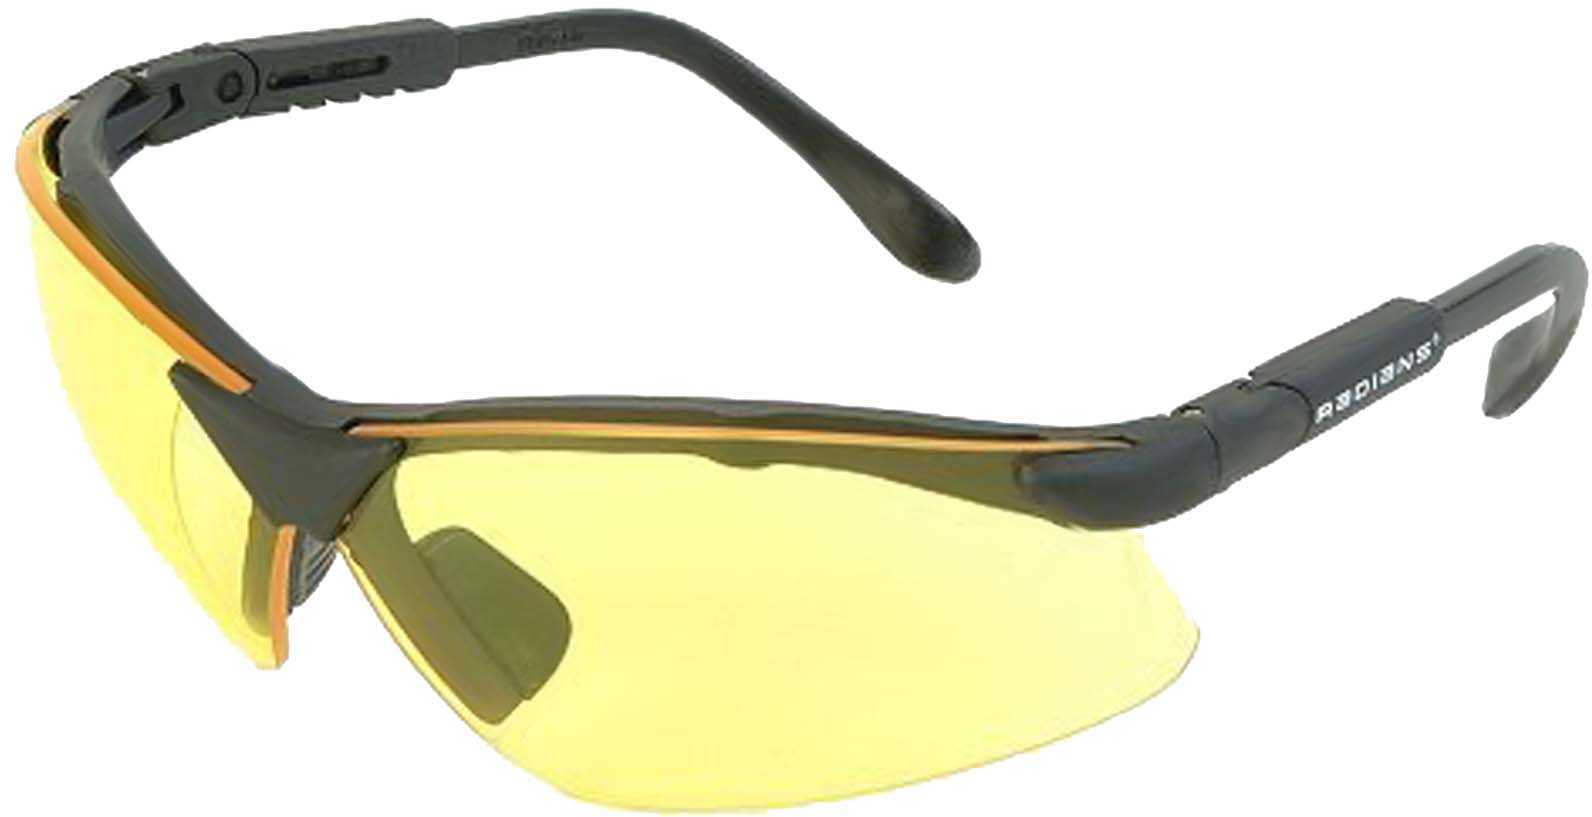 Radians Anti Fog Glasses With 5 Position Ratchet Temples Md: Rv0140Cs